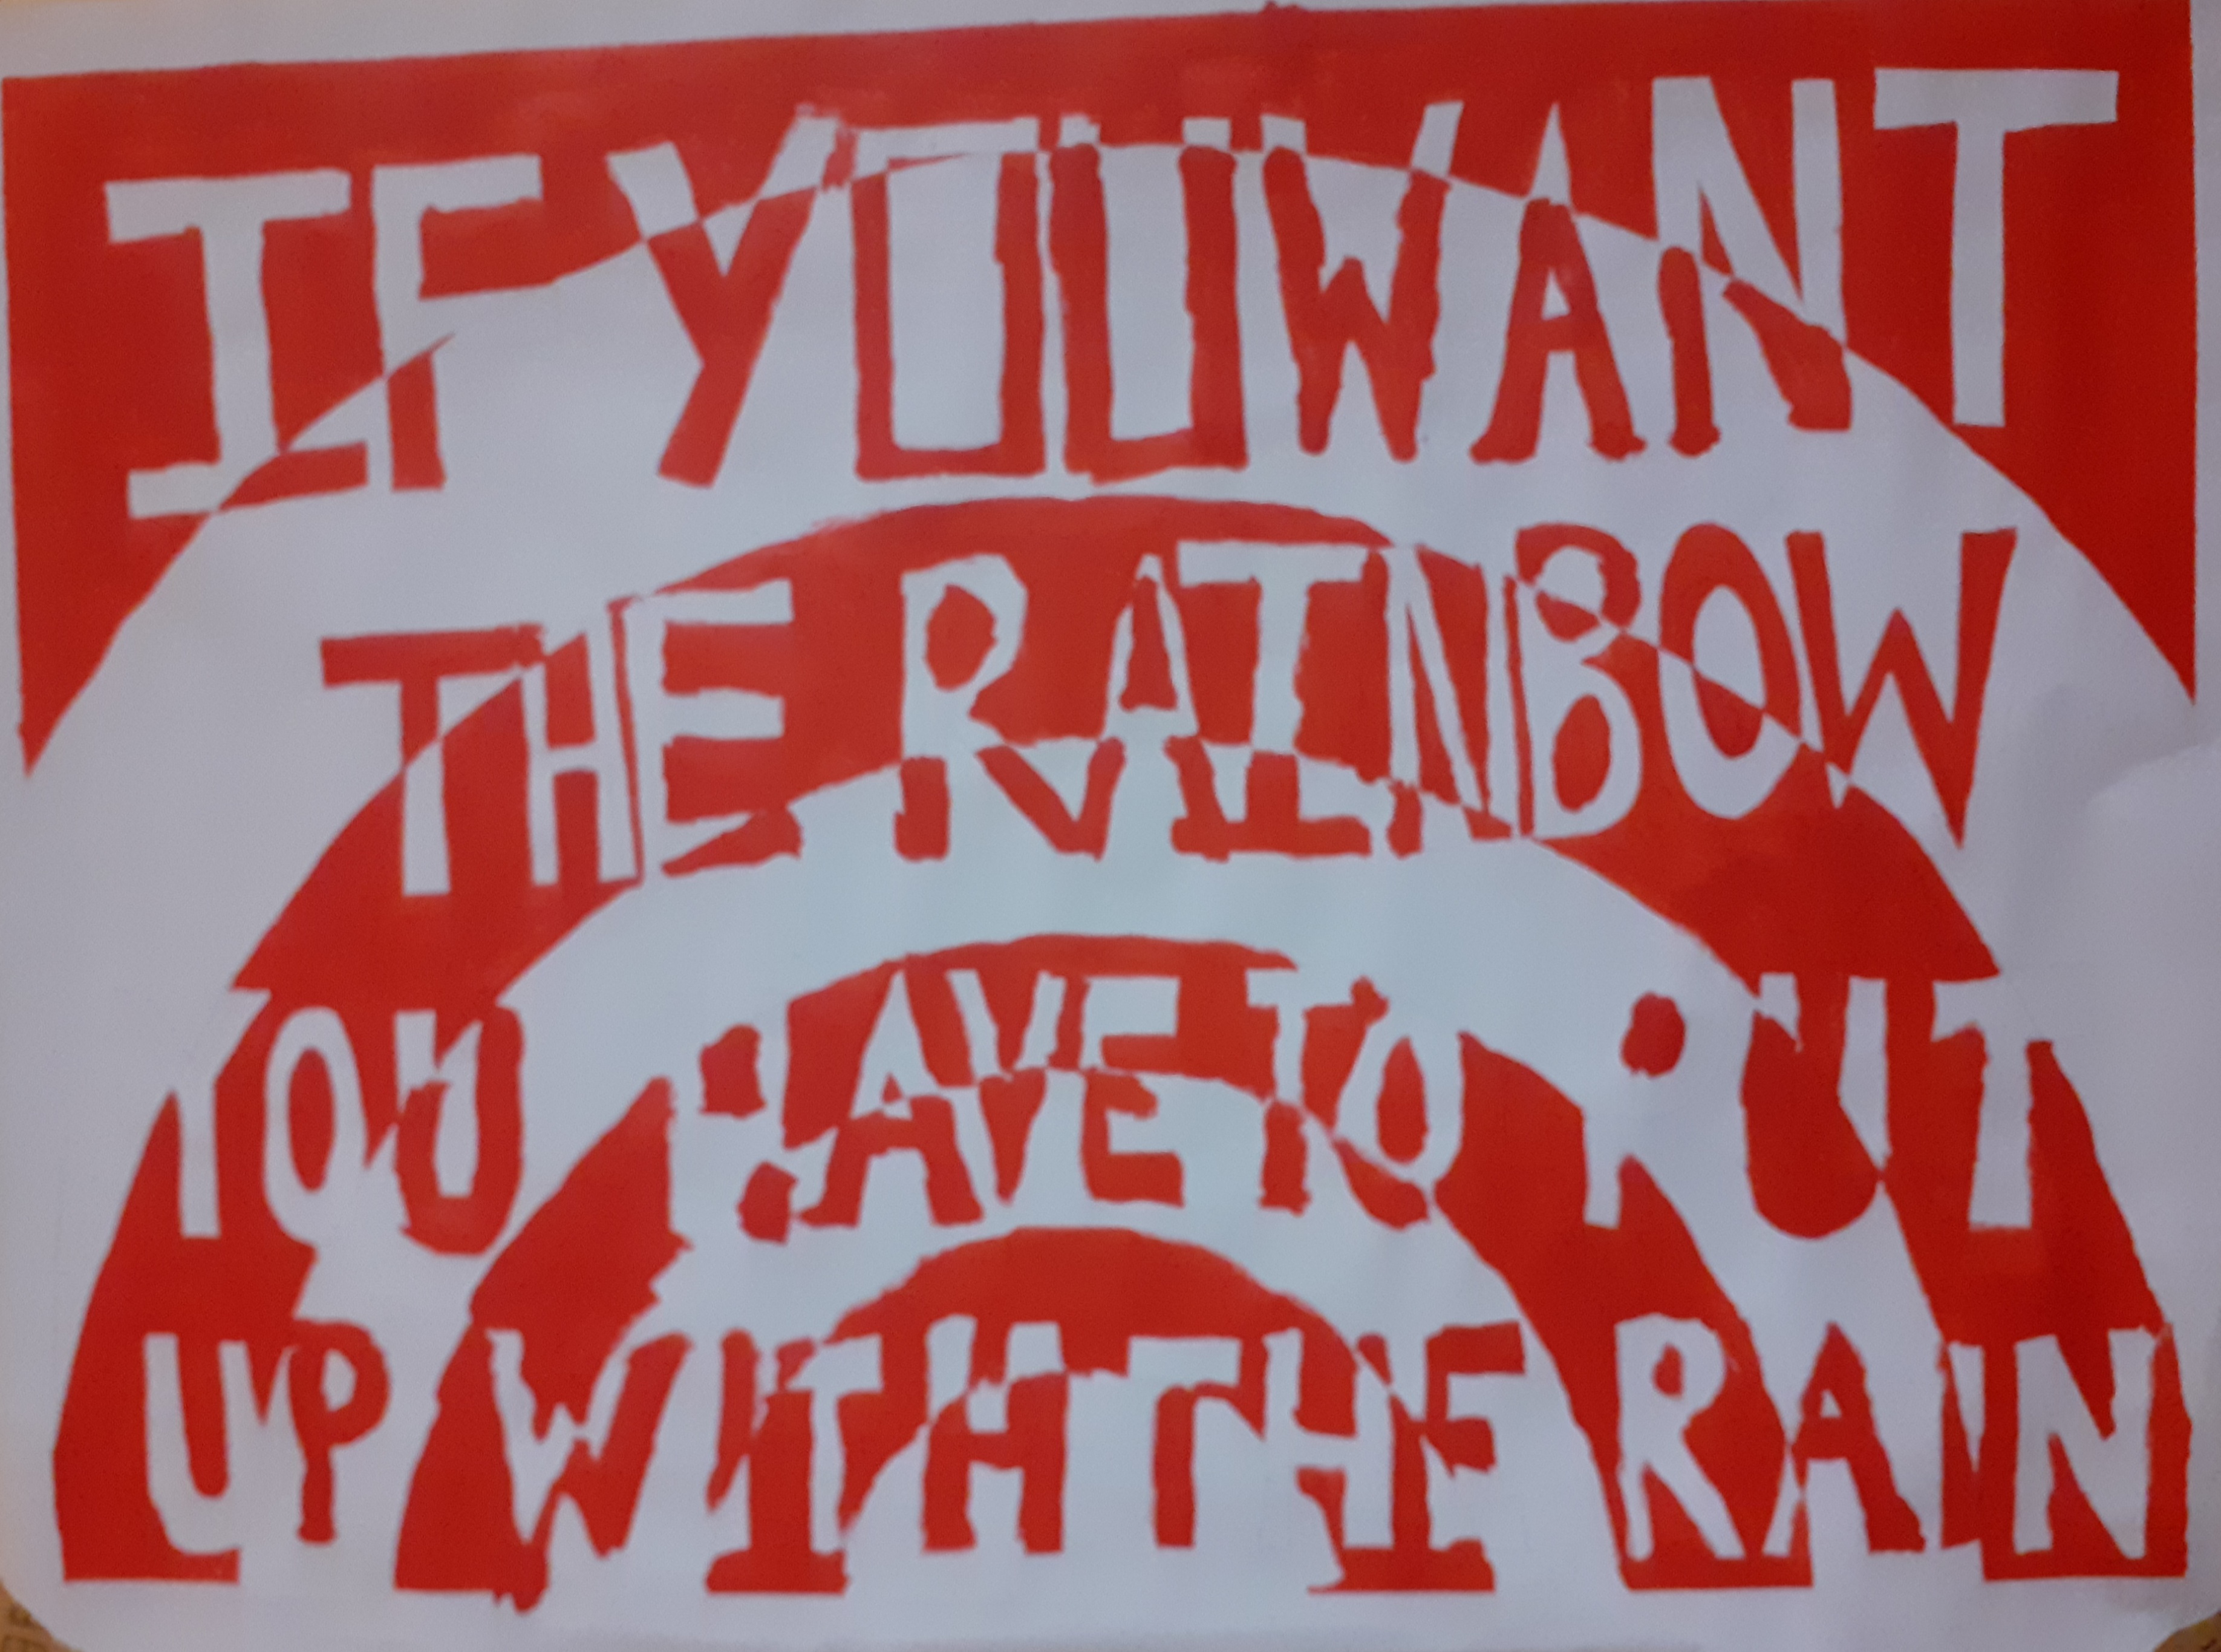 'If you want the rainbow' by youth work Ireland cork () from Cork